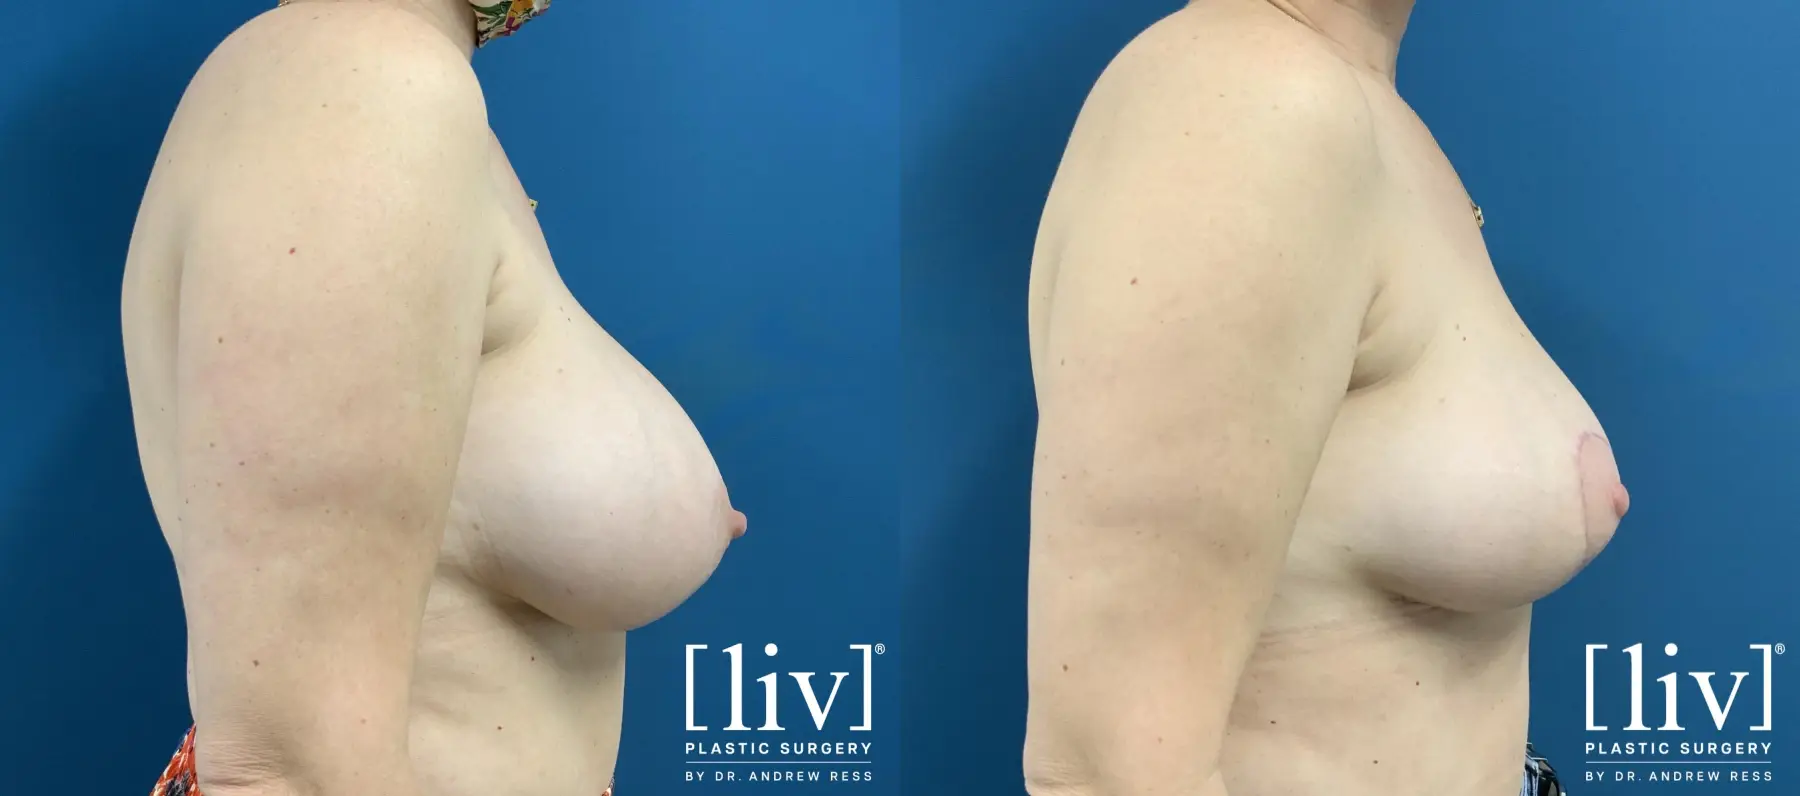 Implant removal with Breast Lift and Fat Transfer to Breast  - Before and After 5